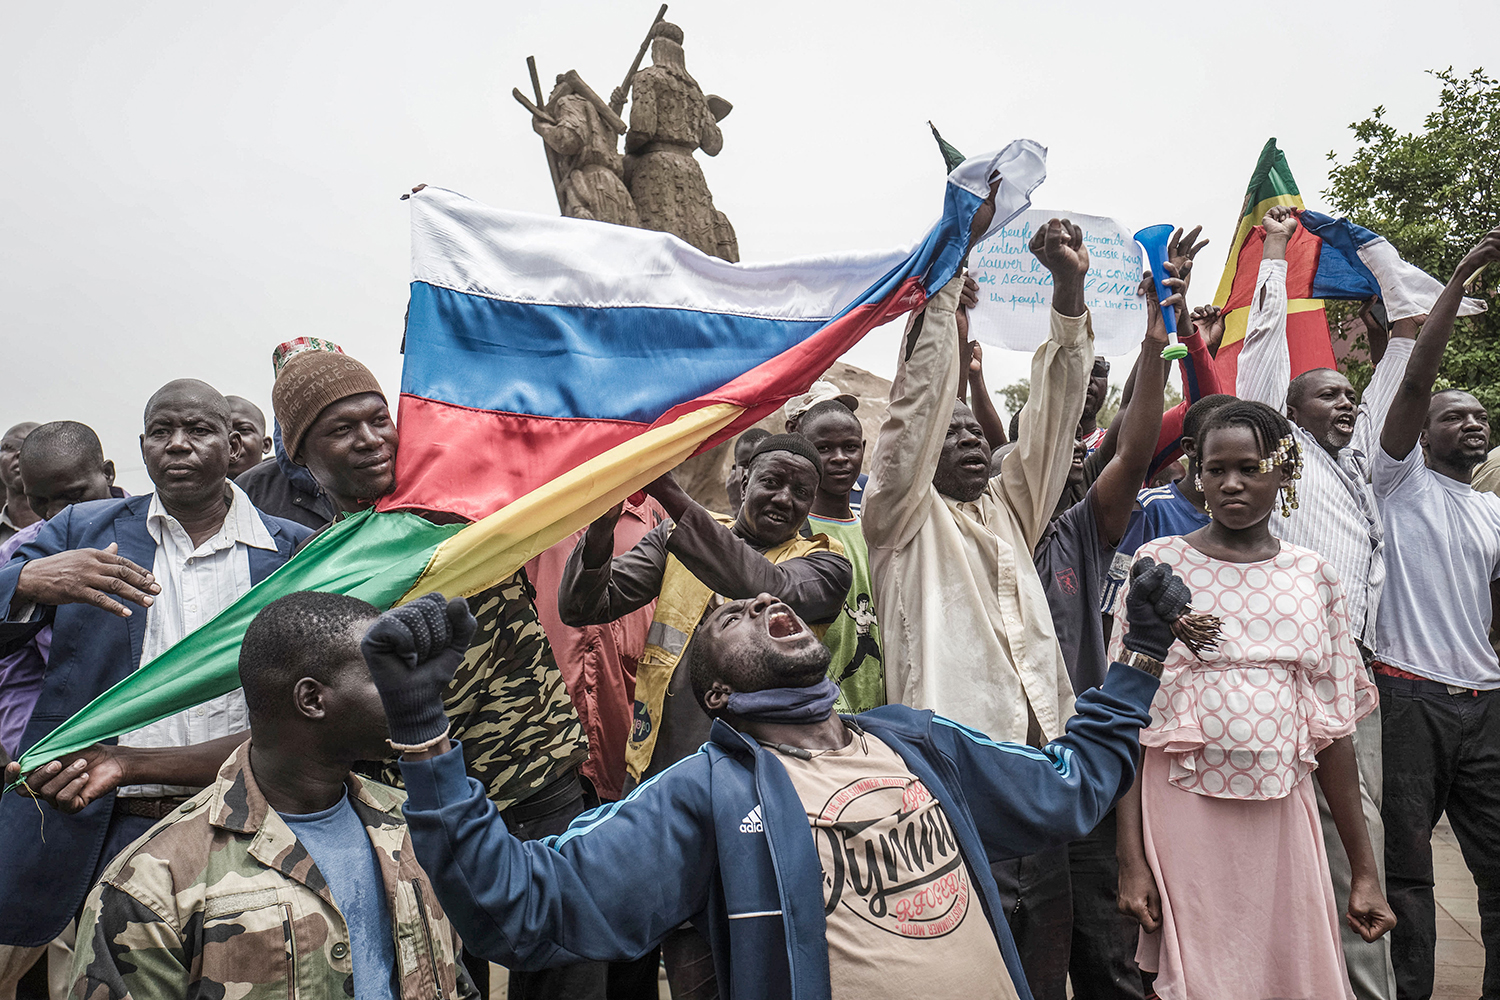 Protesters wave Russian and Malian flags during a demonstration in Bamako, Mali, on May 27, 2021, against French influence in the country.